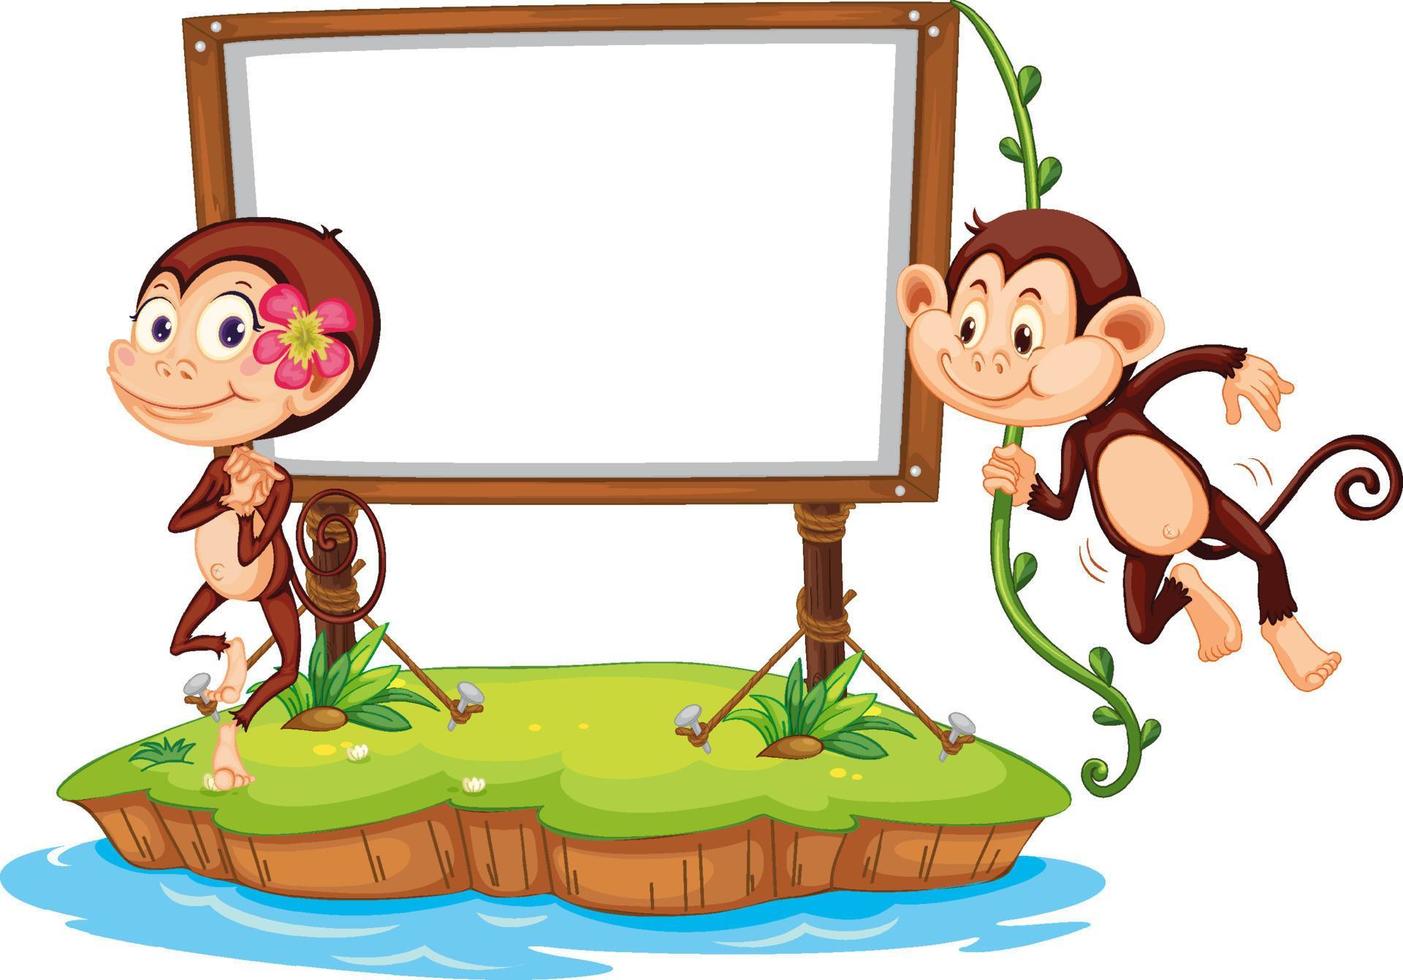 Cute monkeys with blank board on white background vector